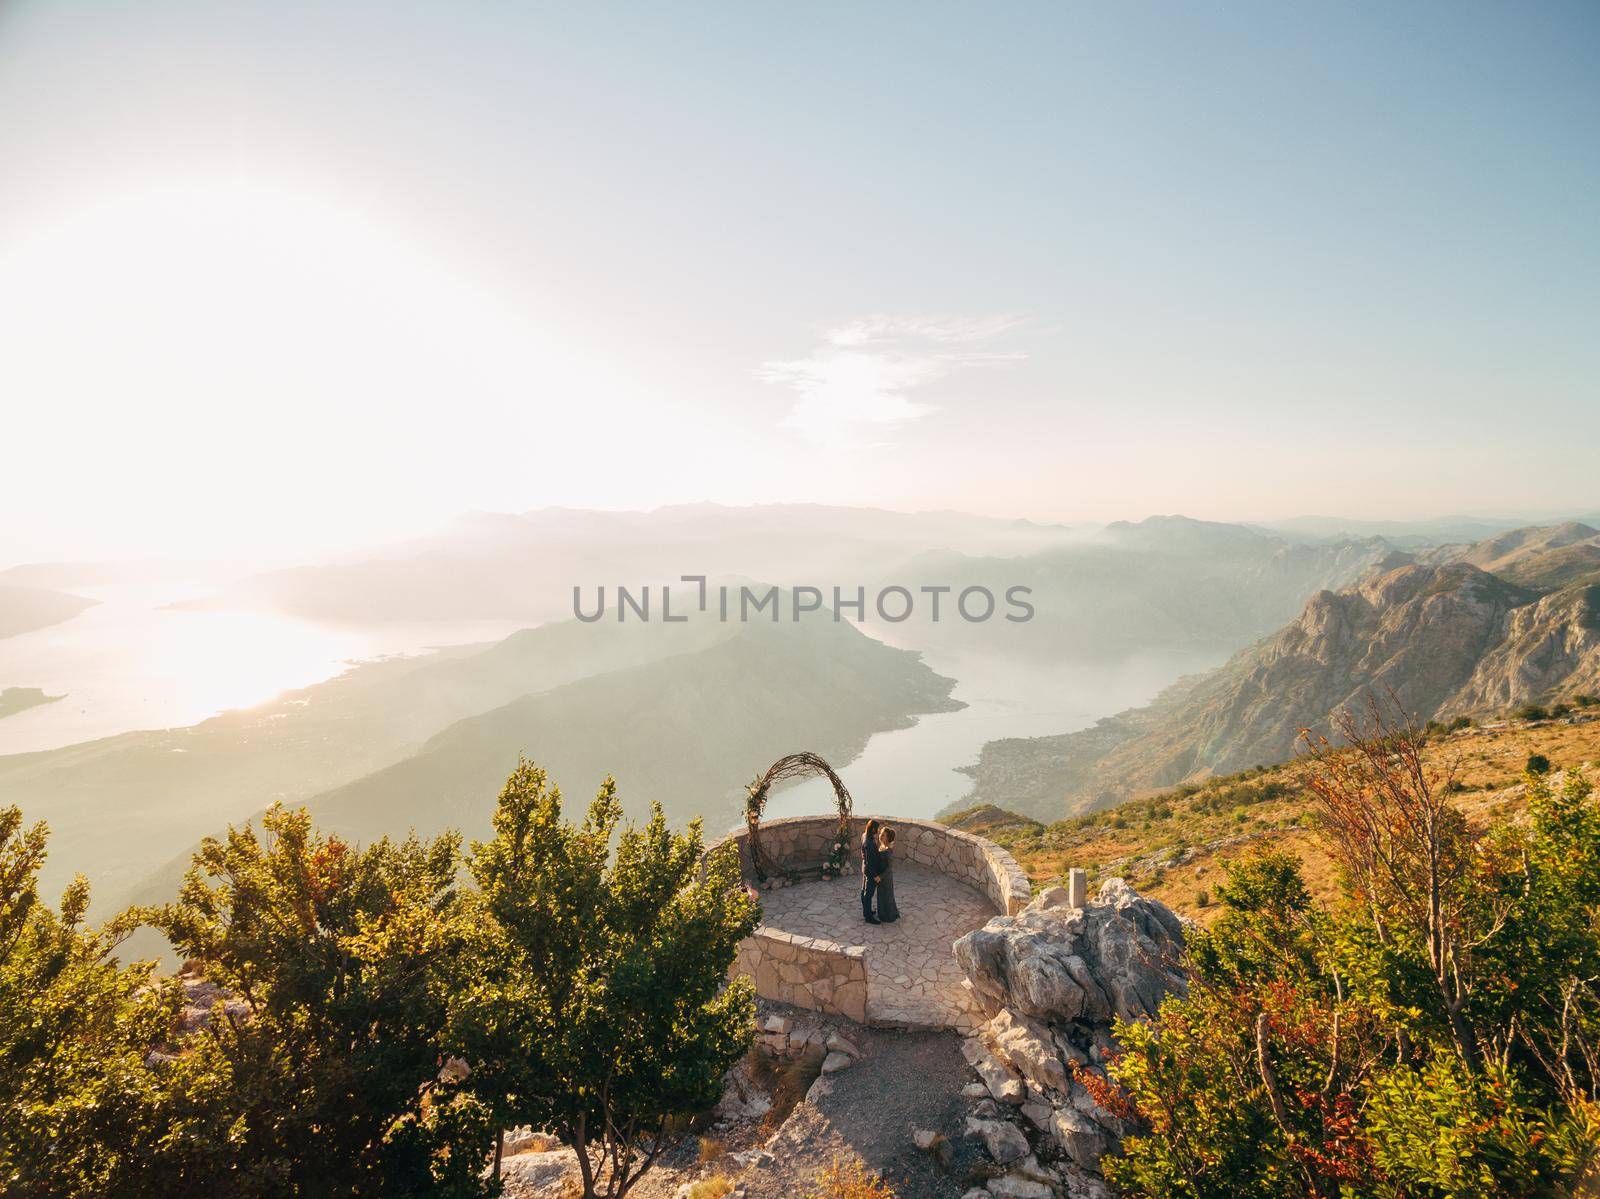 The bride and groom hug near the wedding arch on the observation deck on Mount Lovcen overlooking the Bay of Kotor by Nadtochiy